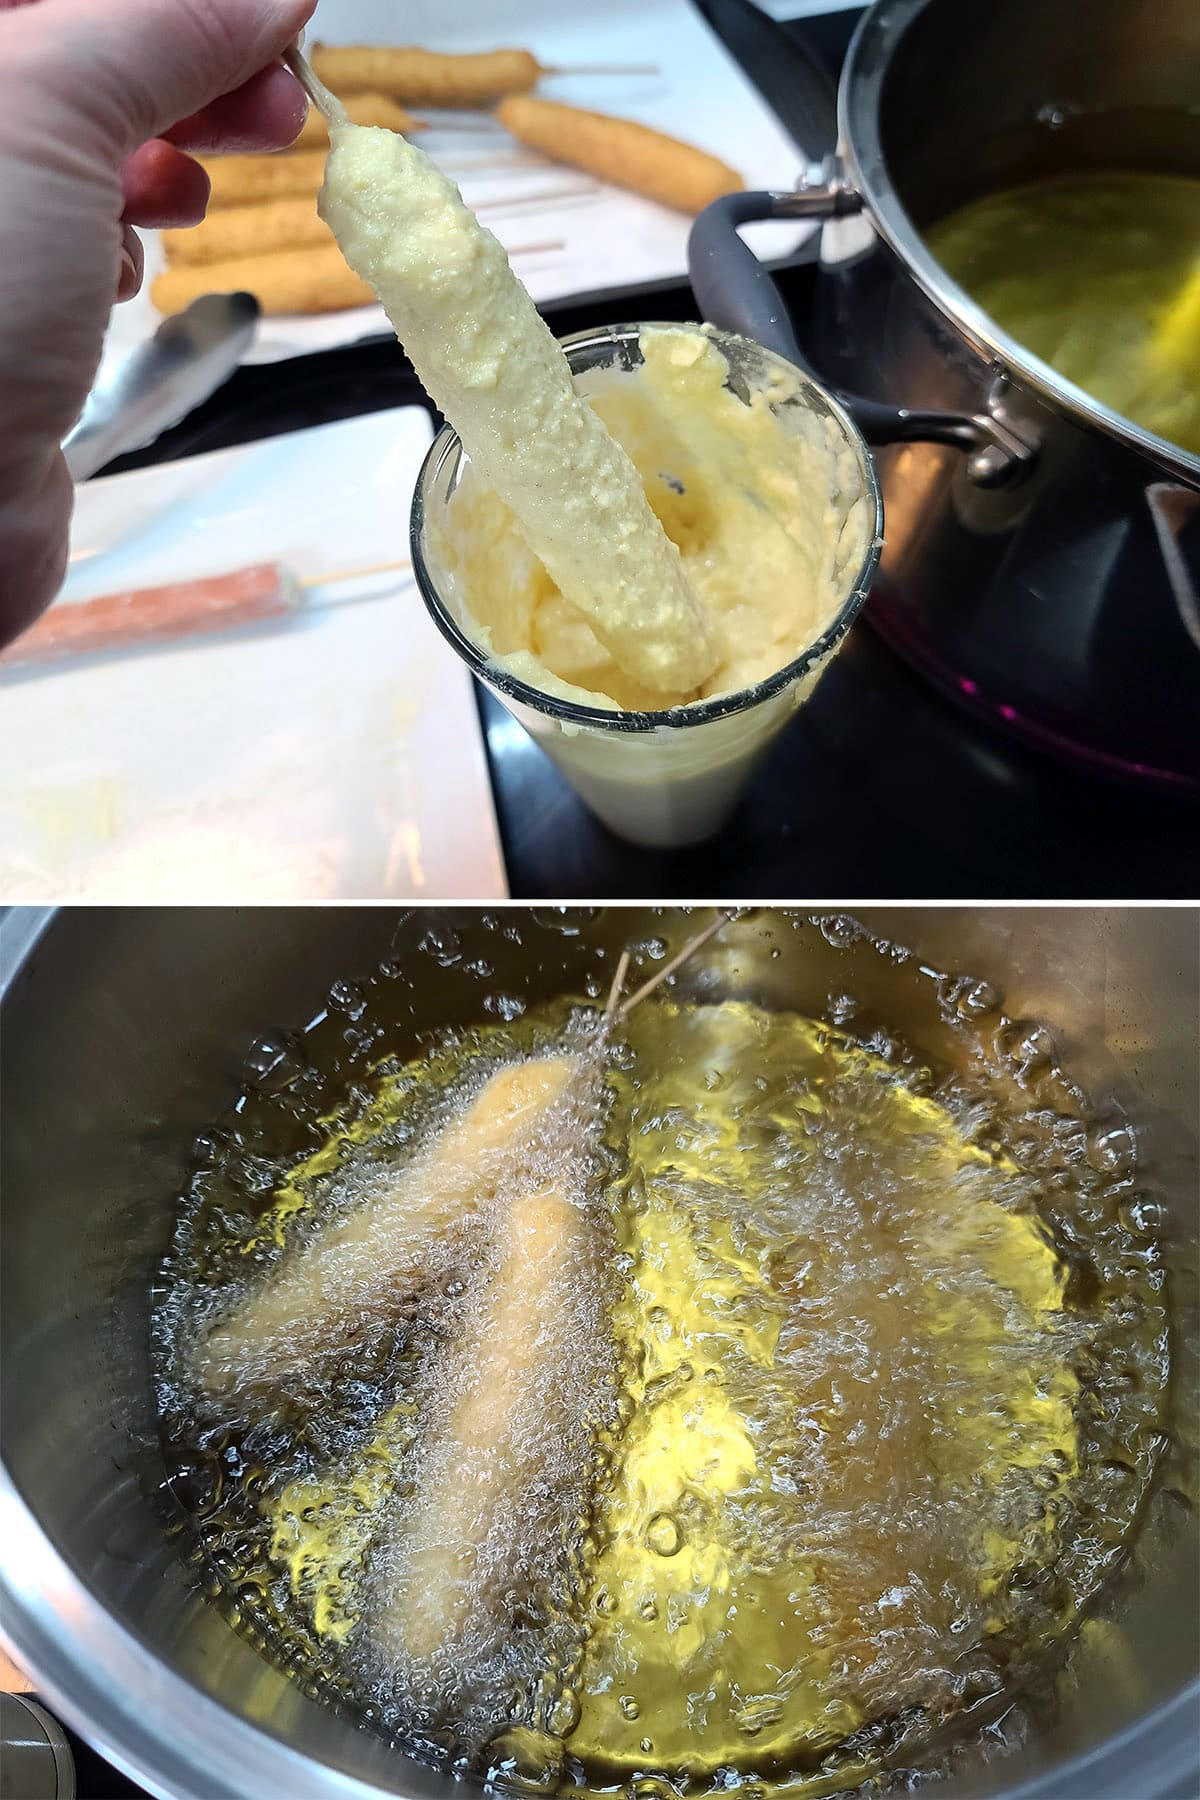 A 2 part image showing the prepared weiners being dipped in batter and then cooked in boiling oil